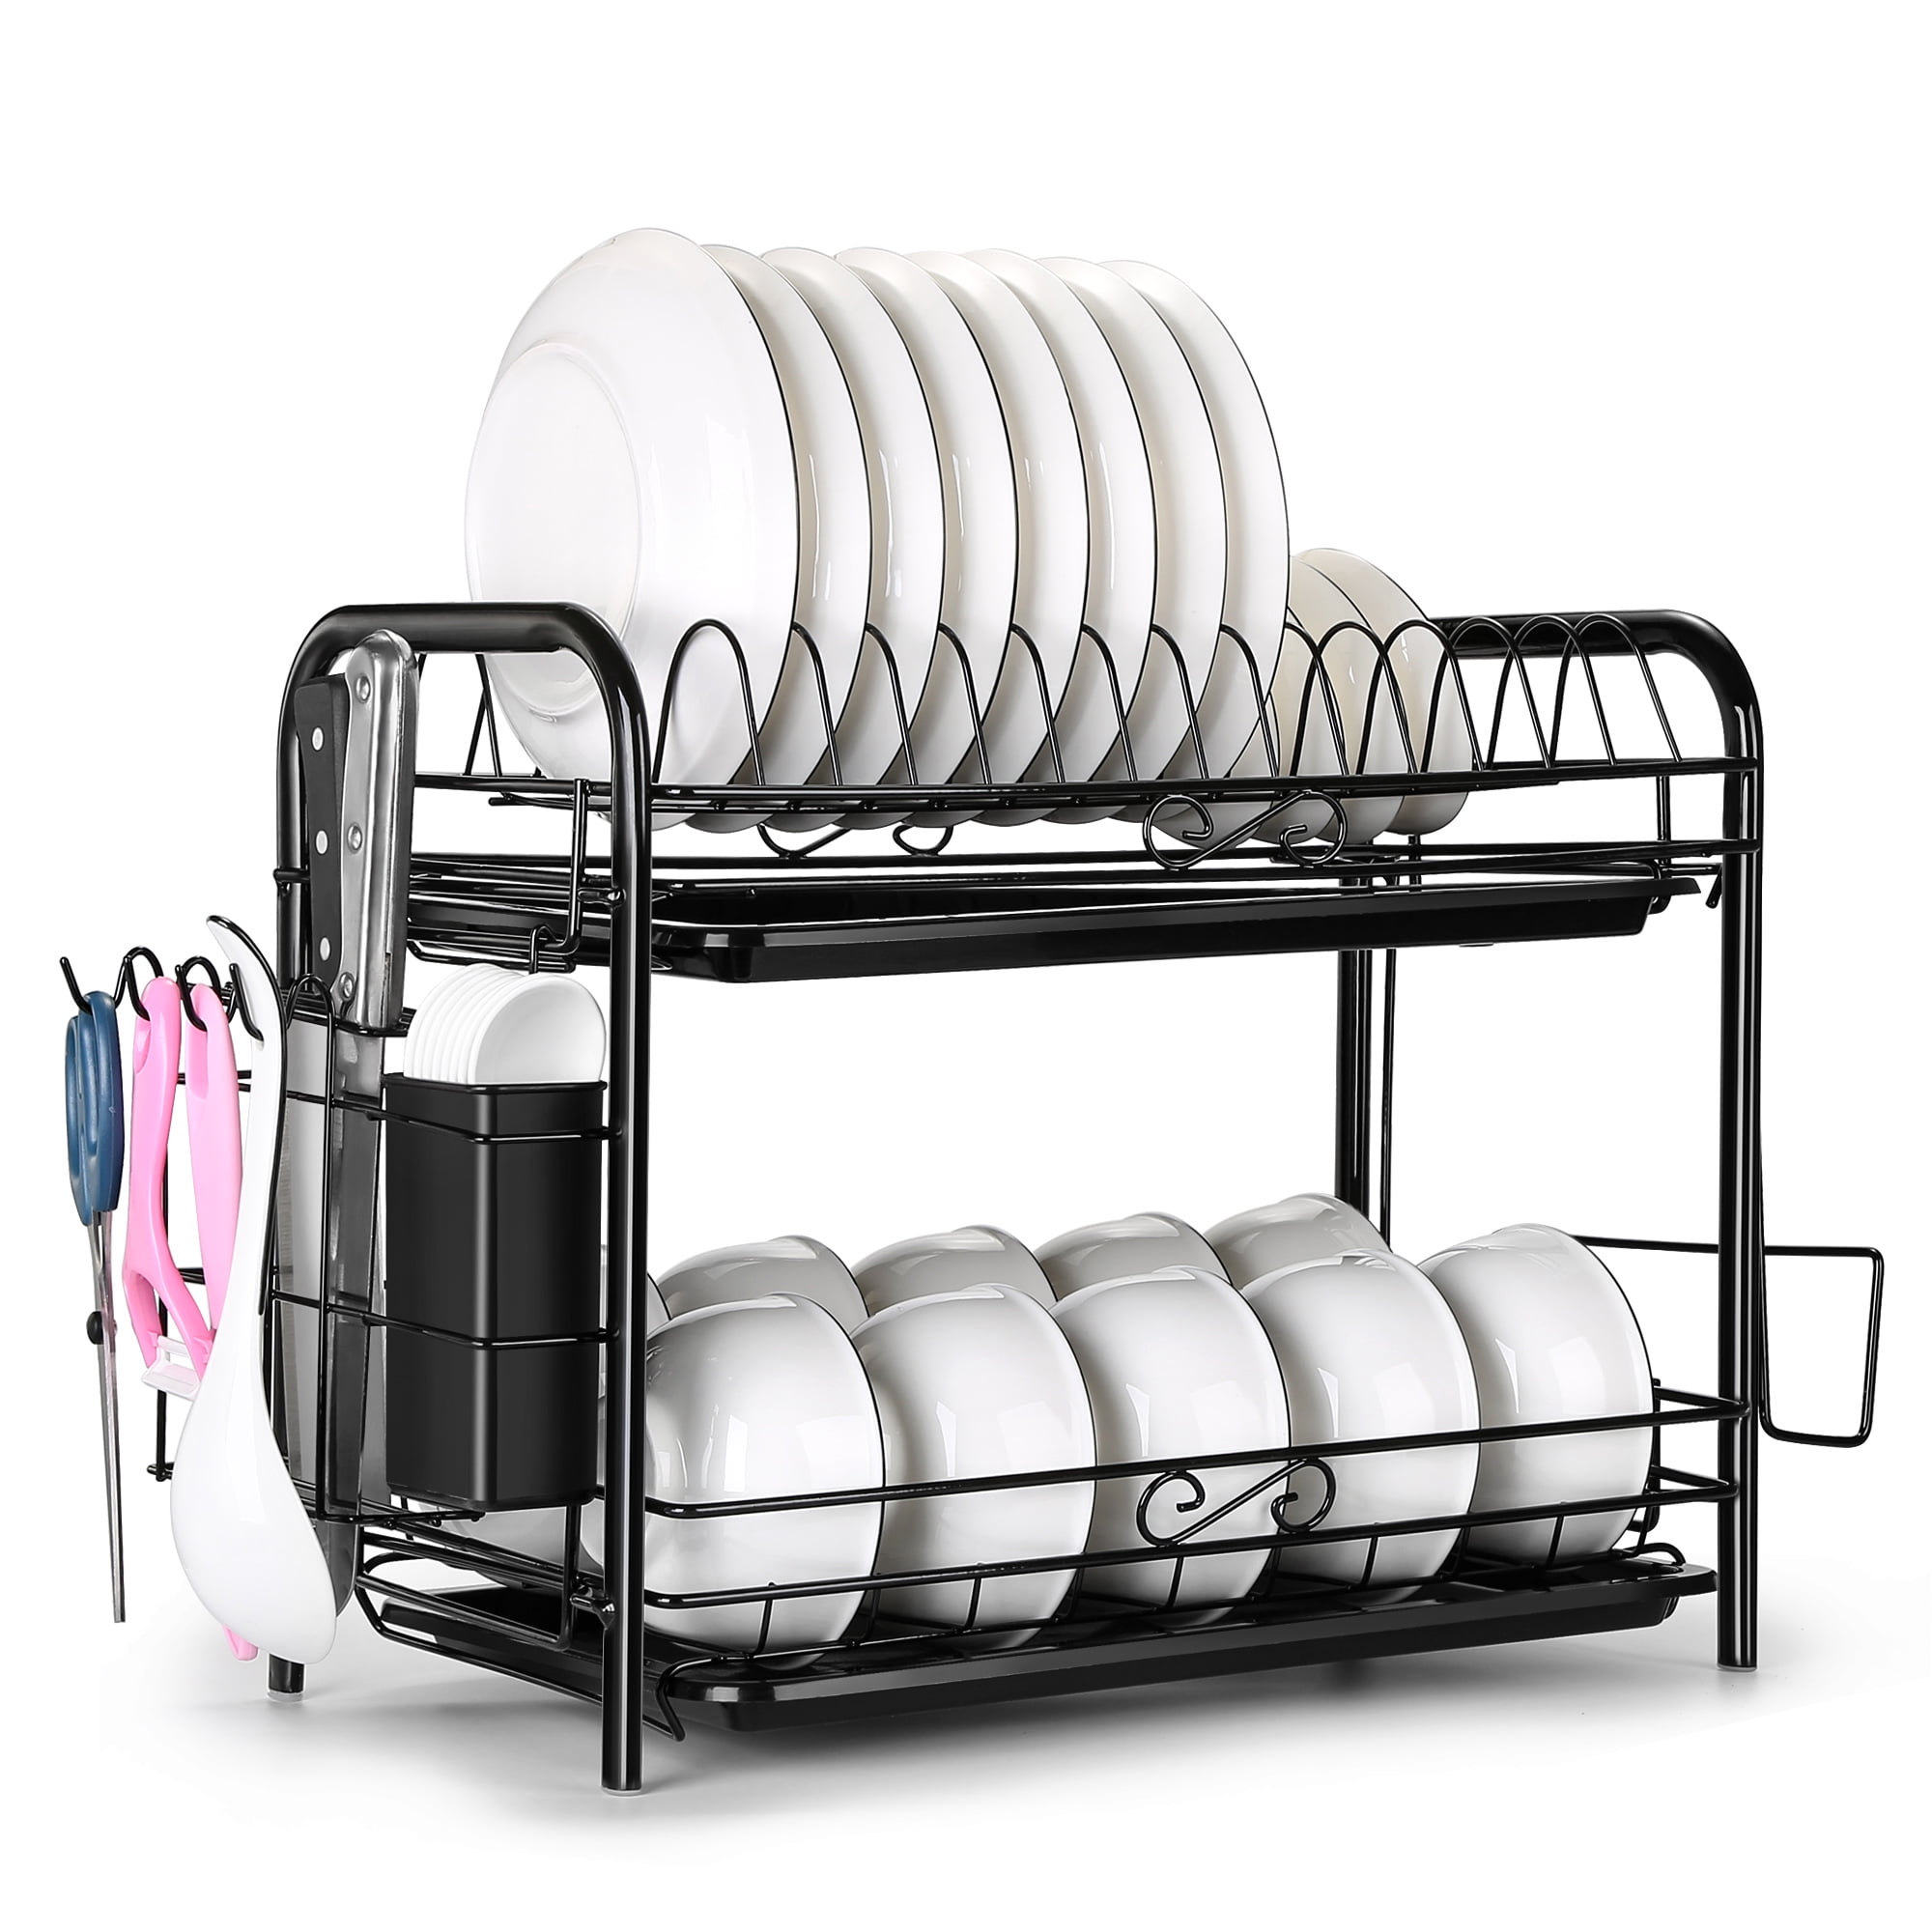 Kitchen Top 2 Two Tier Dish Drainer Plate Bowl Cup Mug Glass Cutlery Rack Holder 